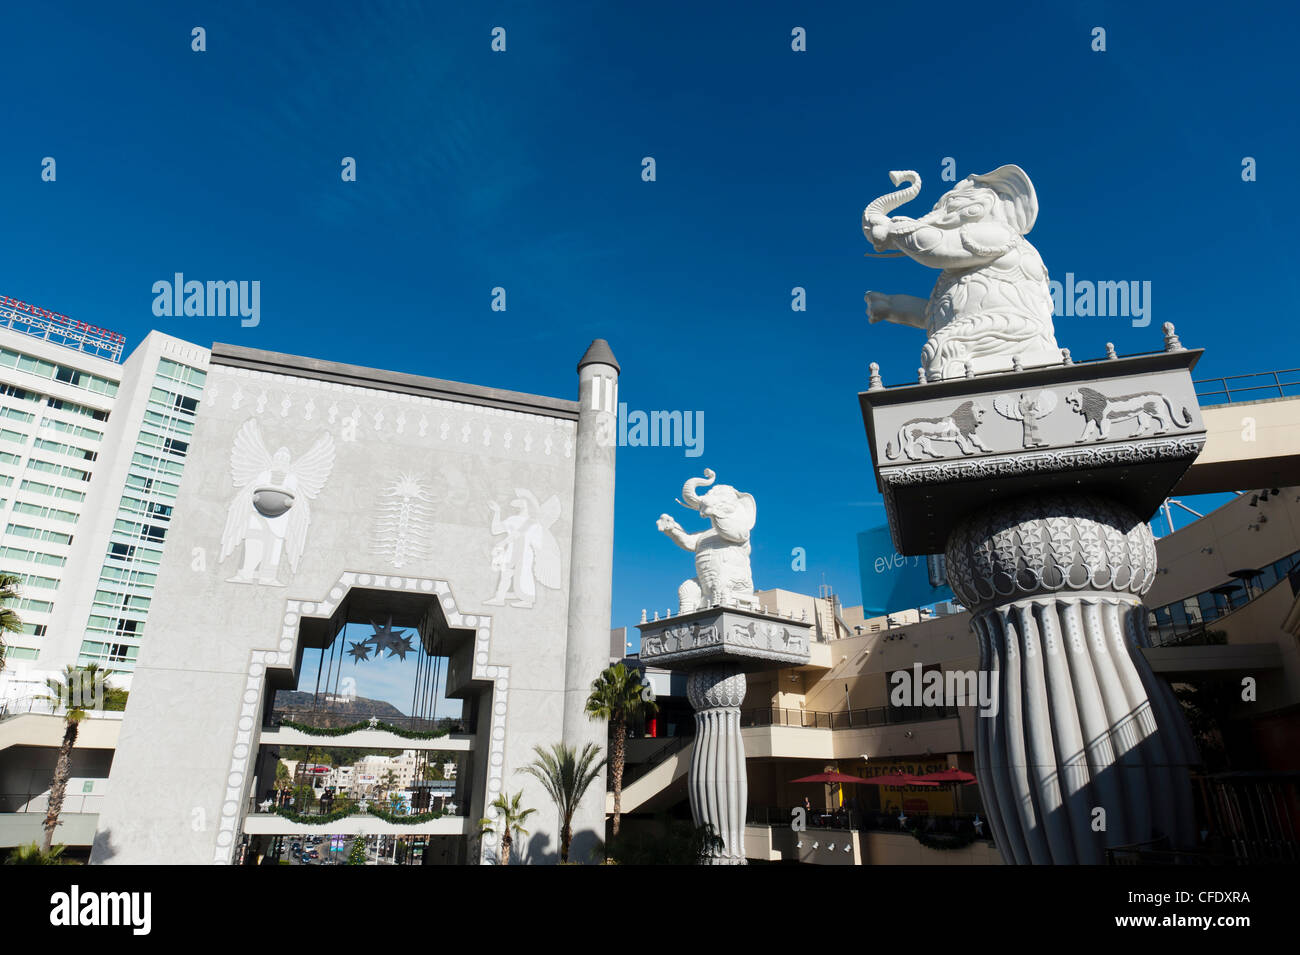 Hollywood and Highland Center, Hollywood, Los Angeles, California, United States of America, Stock Photo